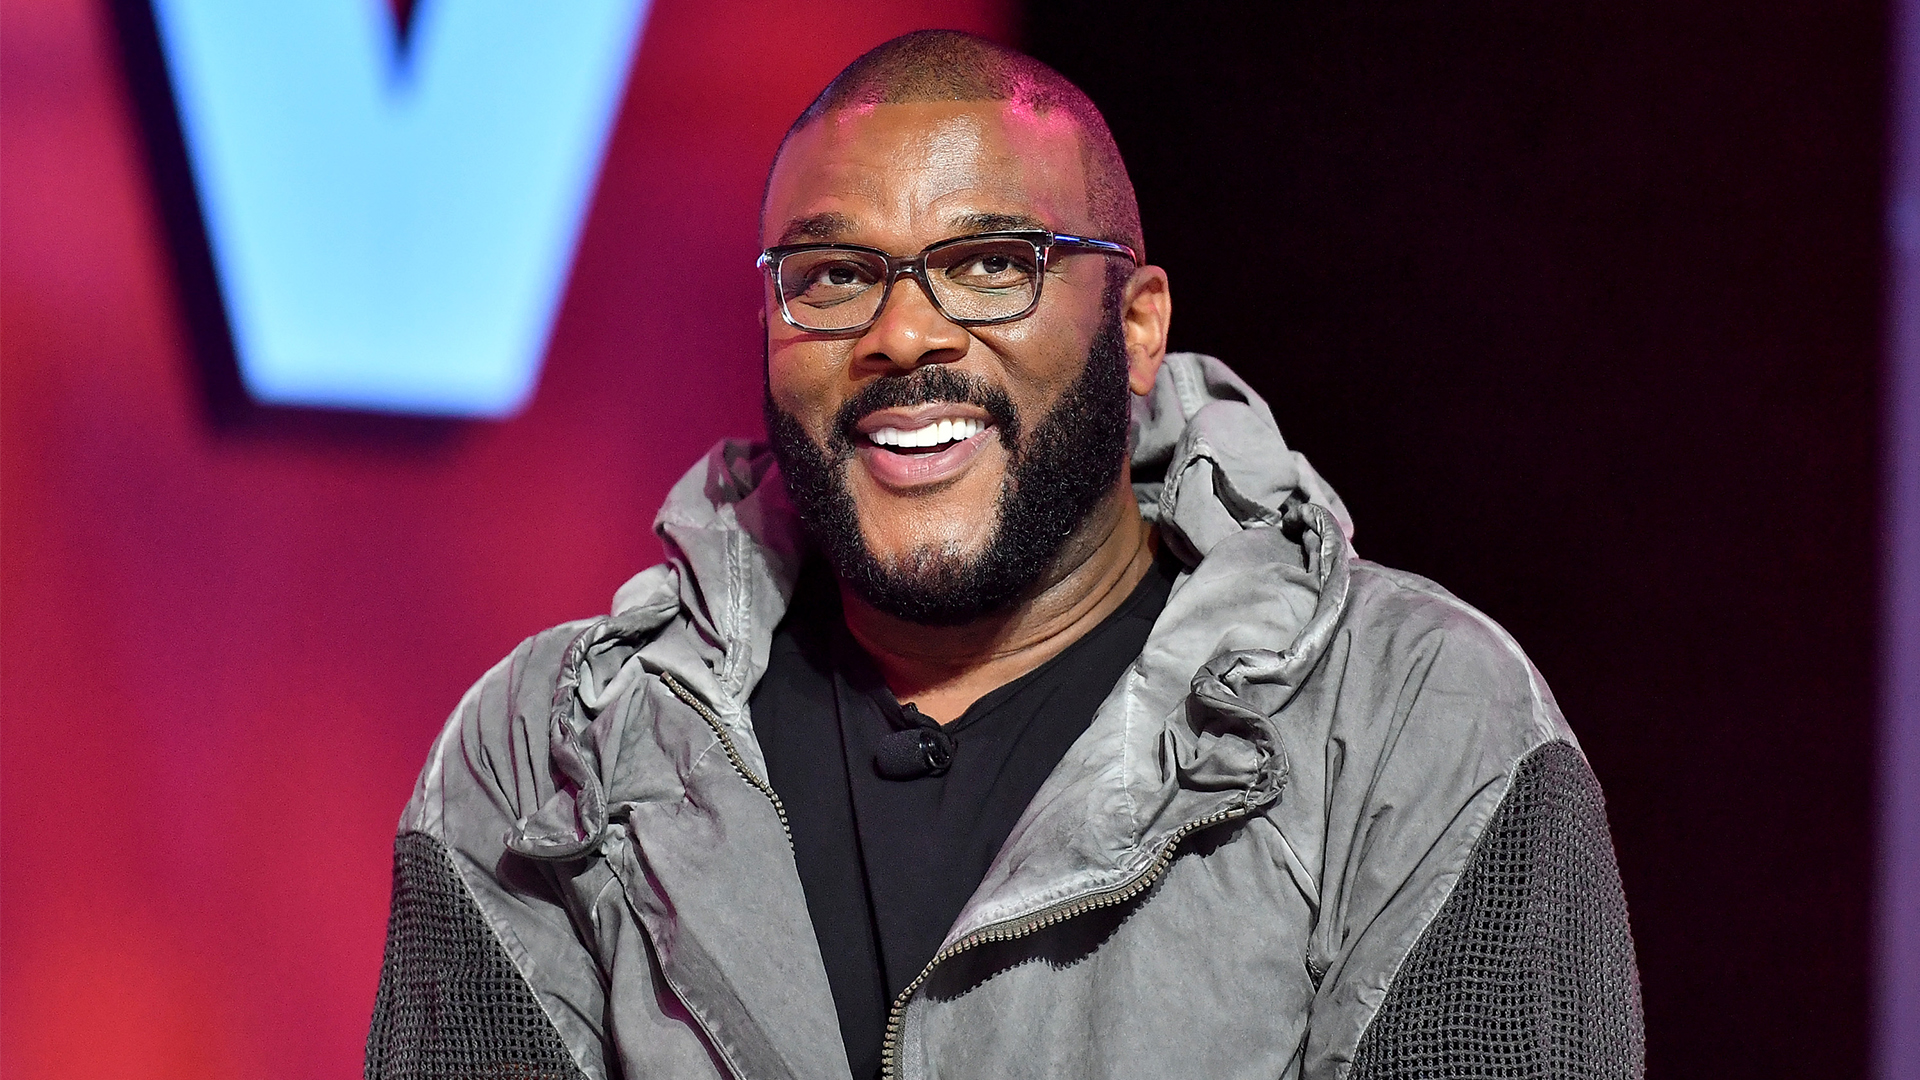 Hallelujer! Billionaire Boss Tyler Perry Lands Extension With Sony Music Publishing